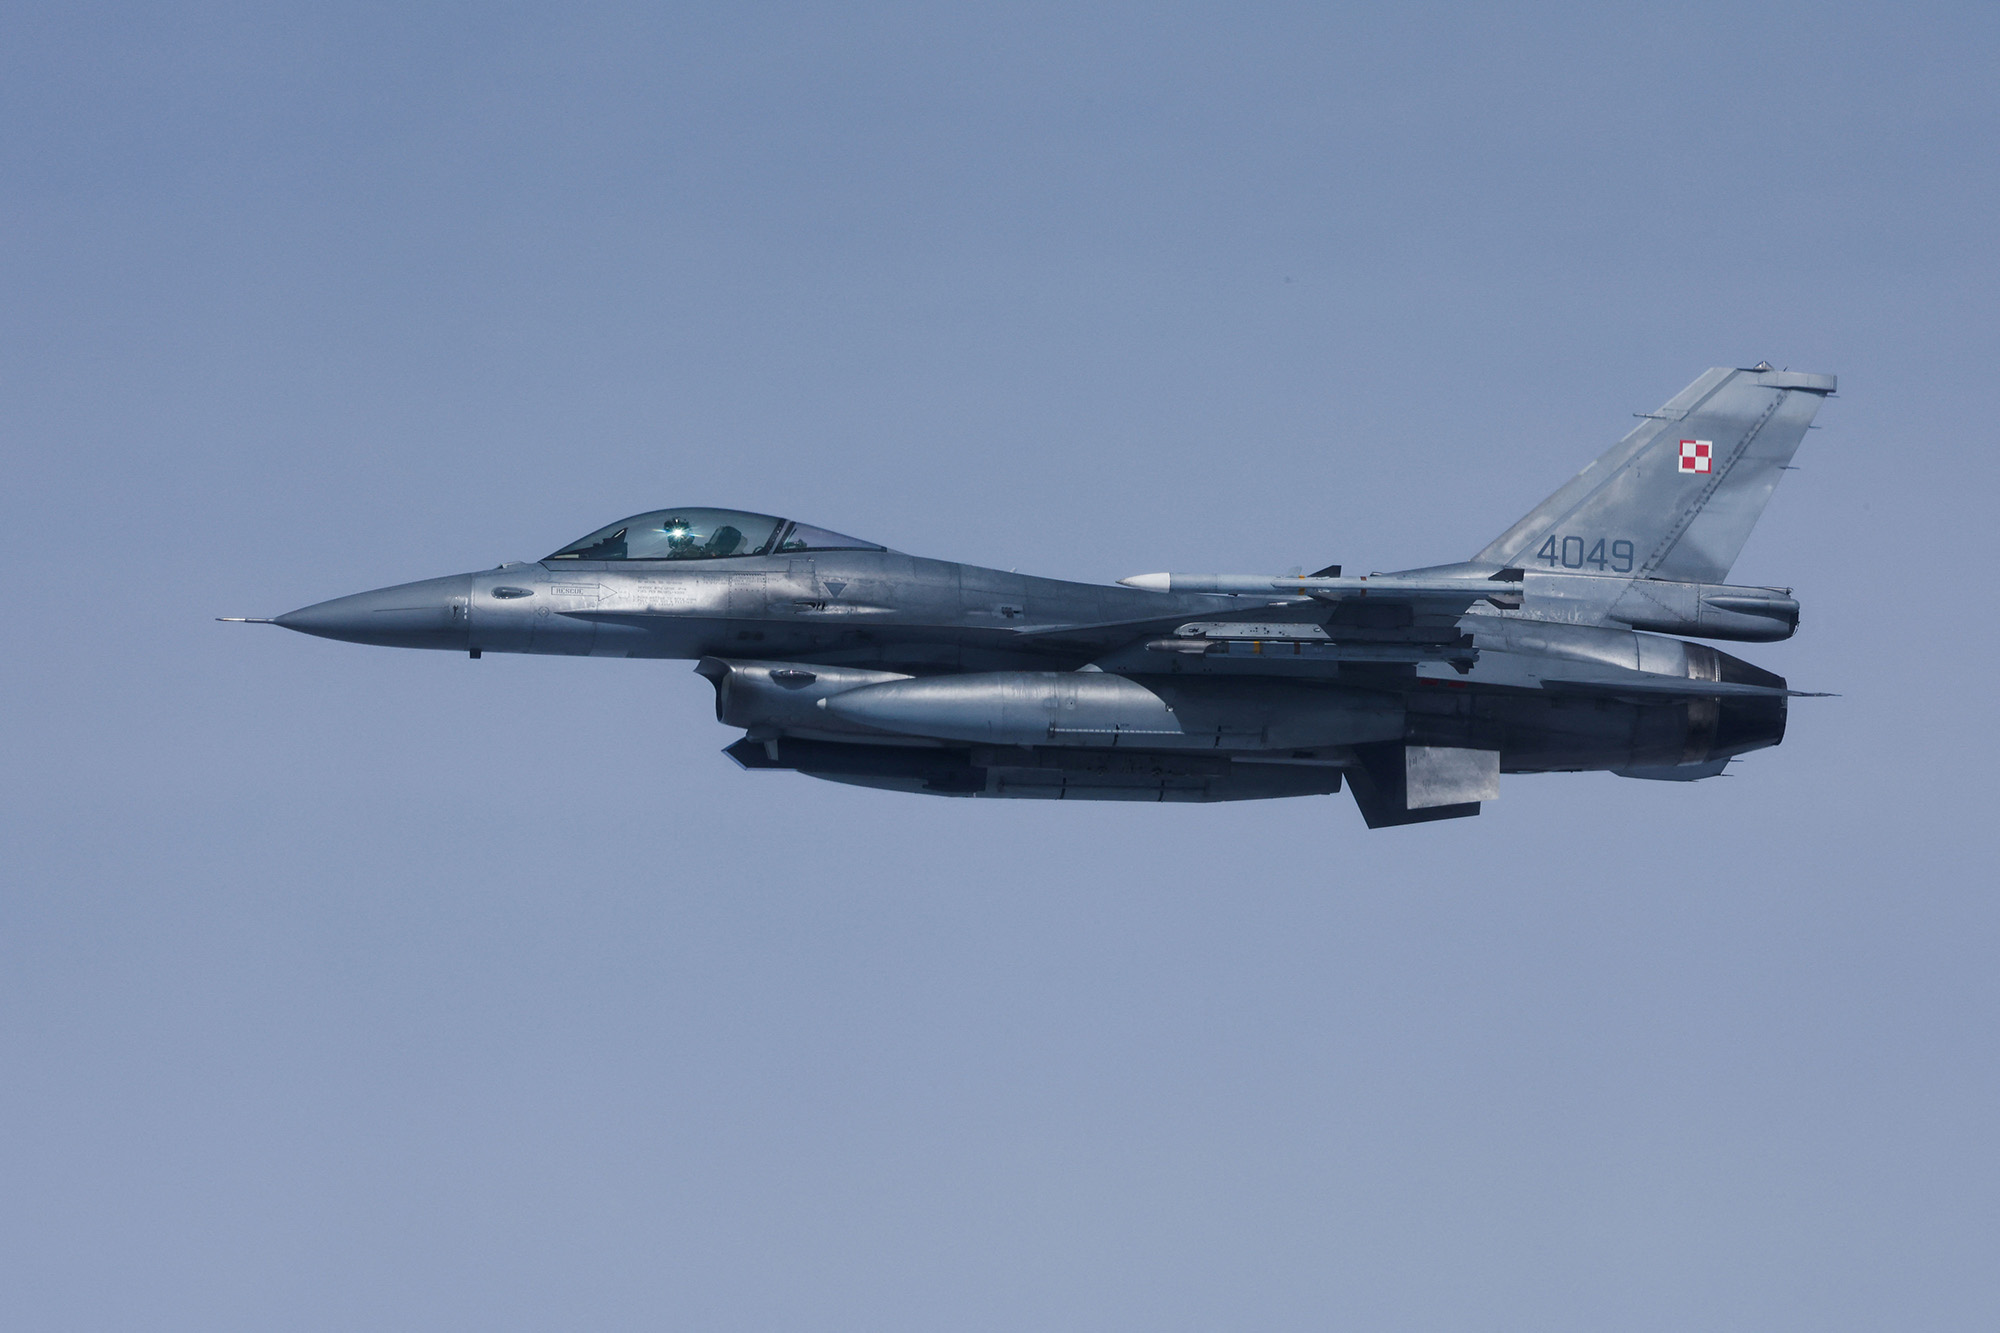 A Polish Air Force fighter jet F16 flies in the airspace of Poland as part of NATO's enhanced Air Policing (eAP) to secure the skies over Baltic allies, March 29.